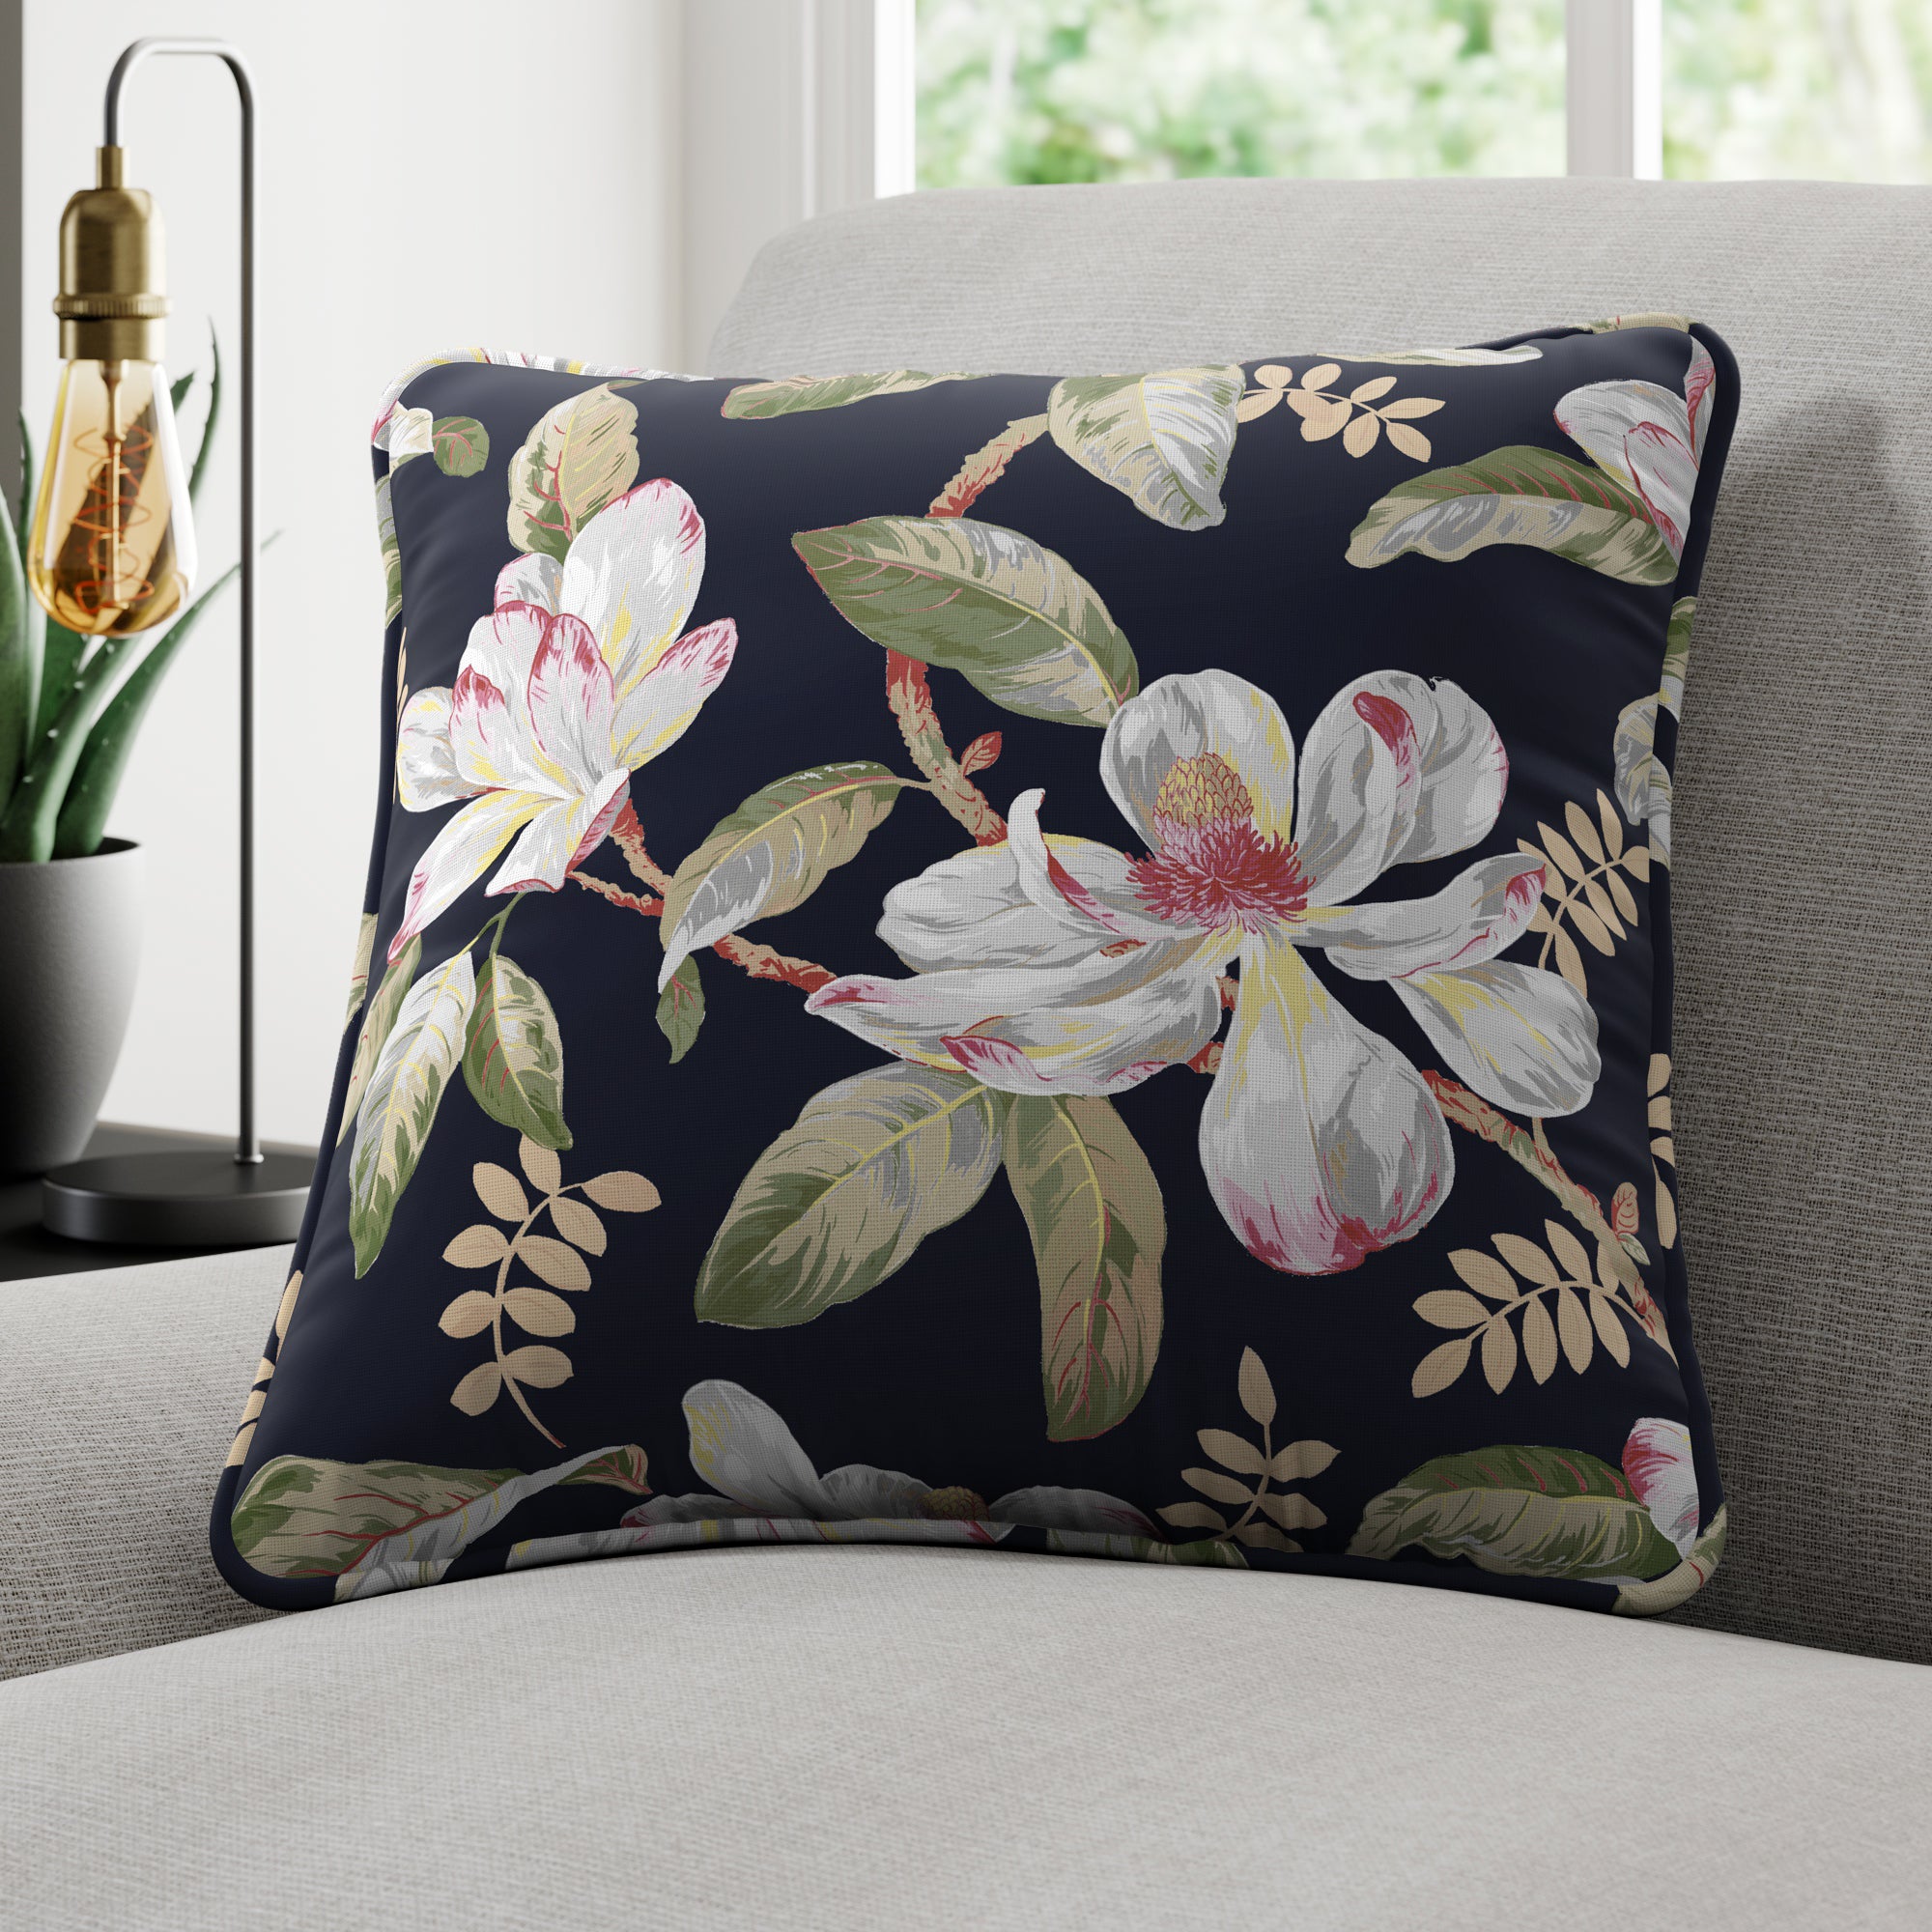 Maximalist Magnolia Made to Order Cushion Cover